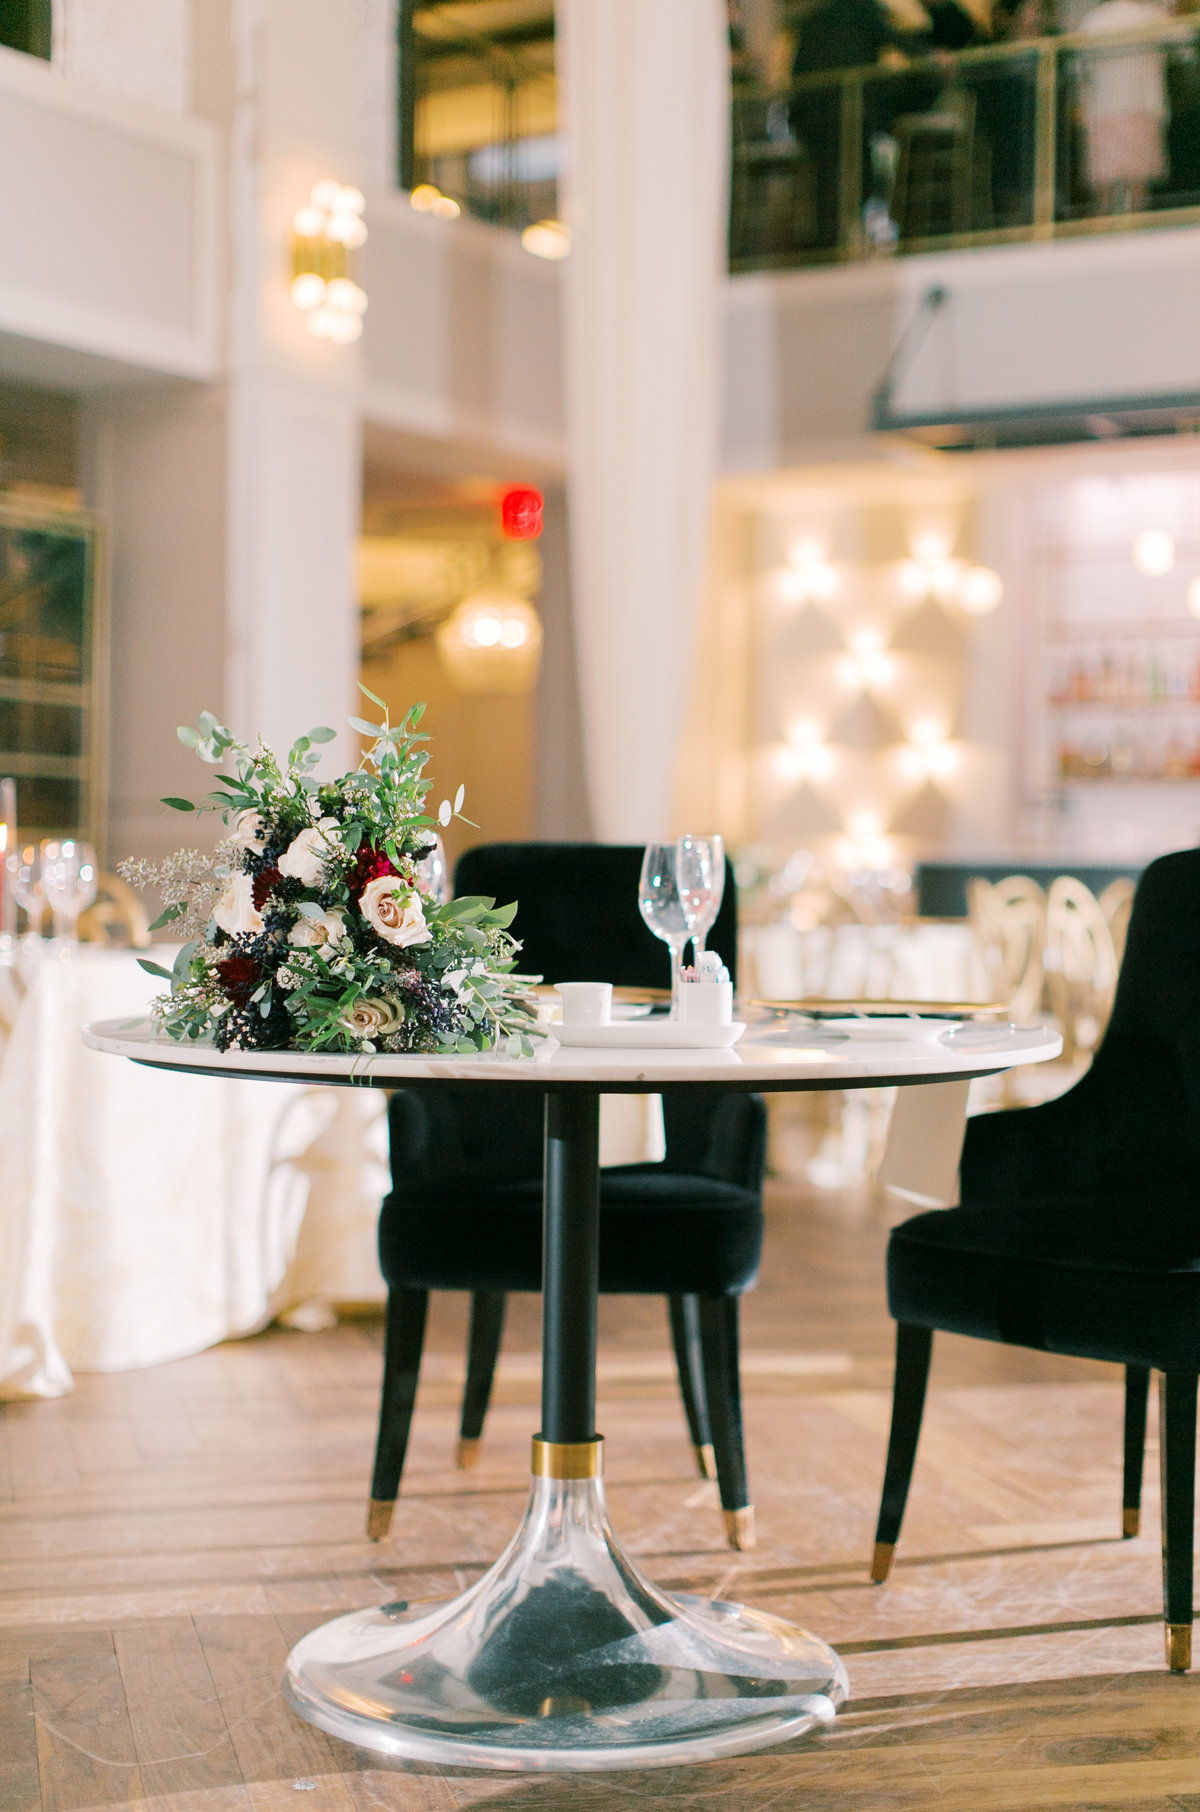 sweethearts table with round table and black chairs